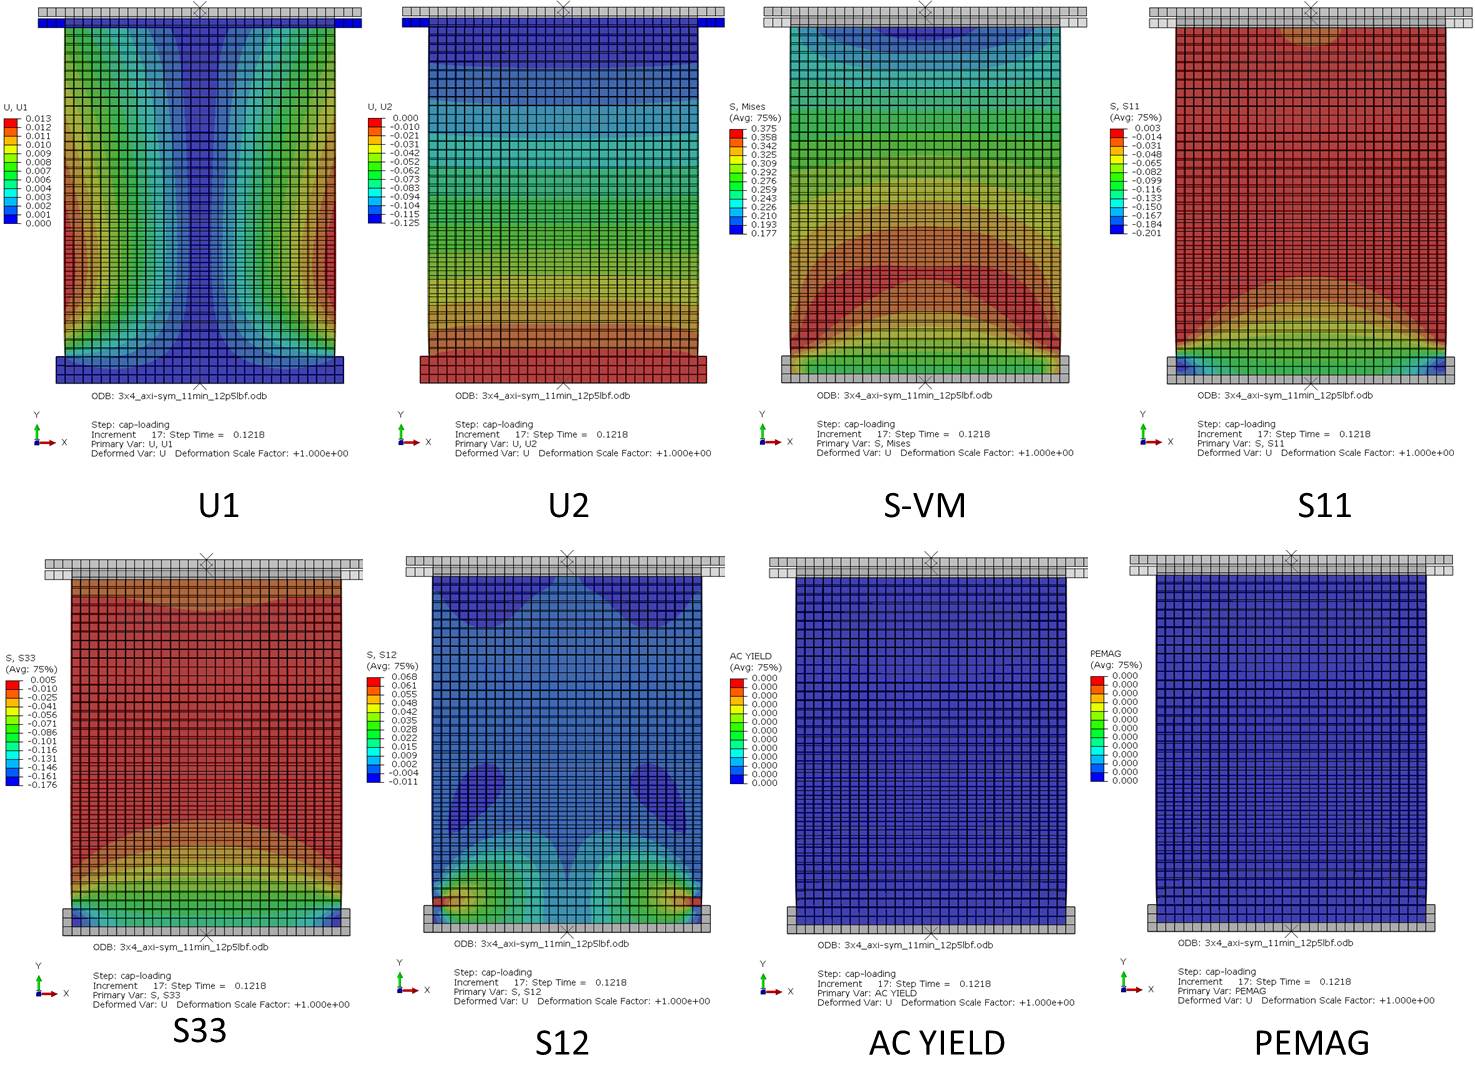 Numerical simulations of fresh mortar specimens loaded in axial compression at specific mortar maturities. The finite element analyses use the linear Drucker-Prager elasto-plastic model (Step-Time=0.12)